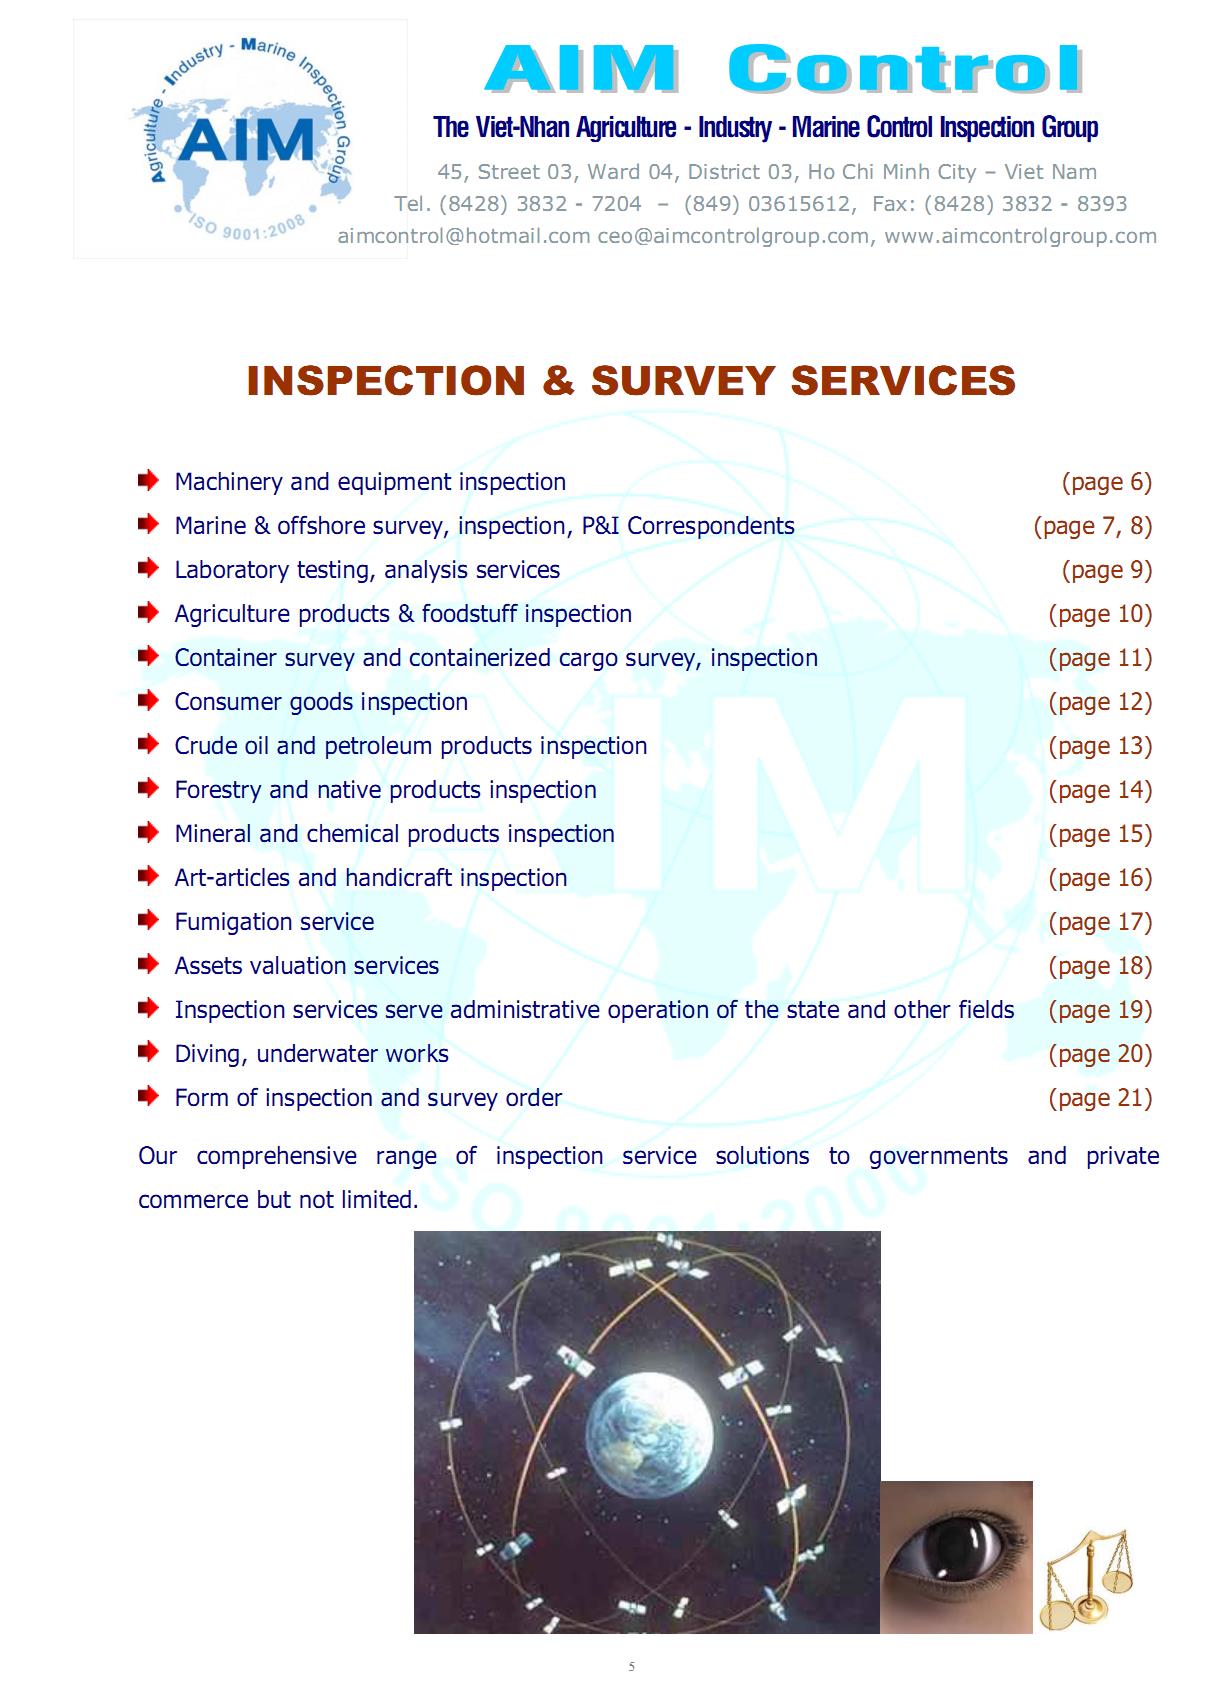 AIM_certification_and_commercial_inspection_services04